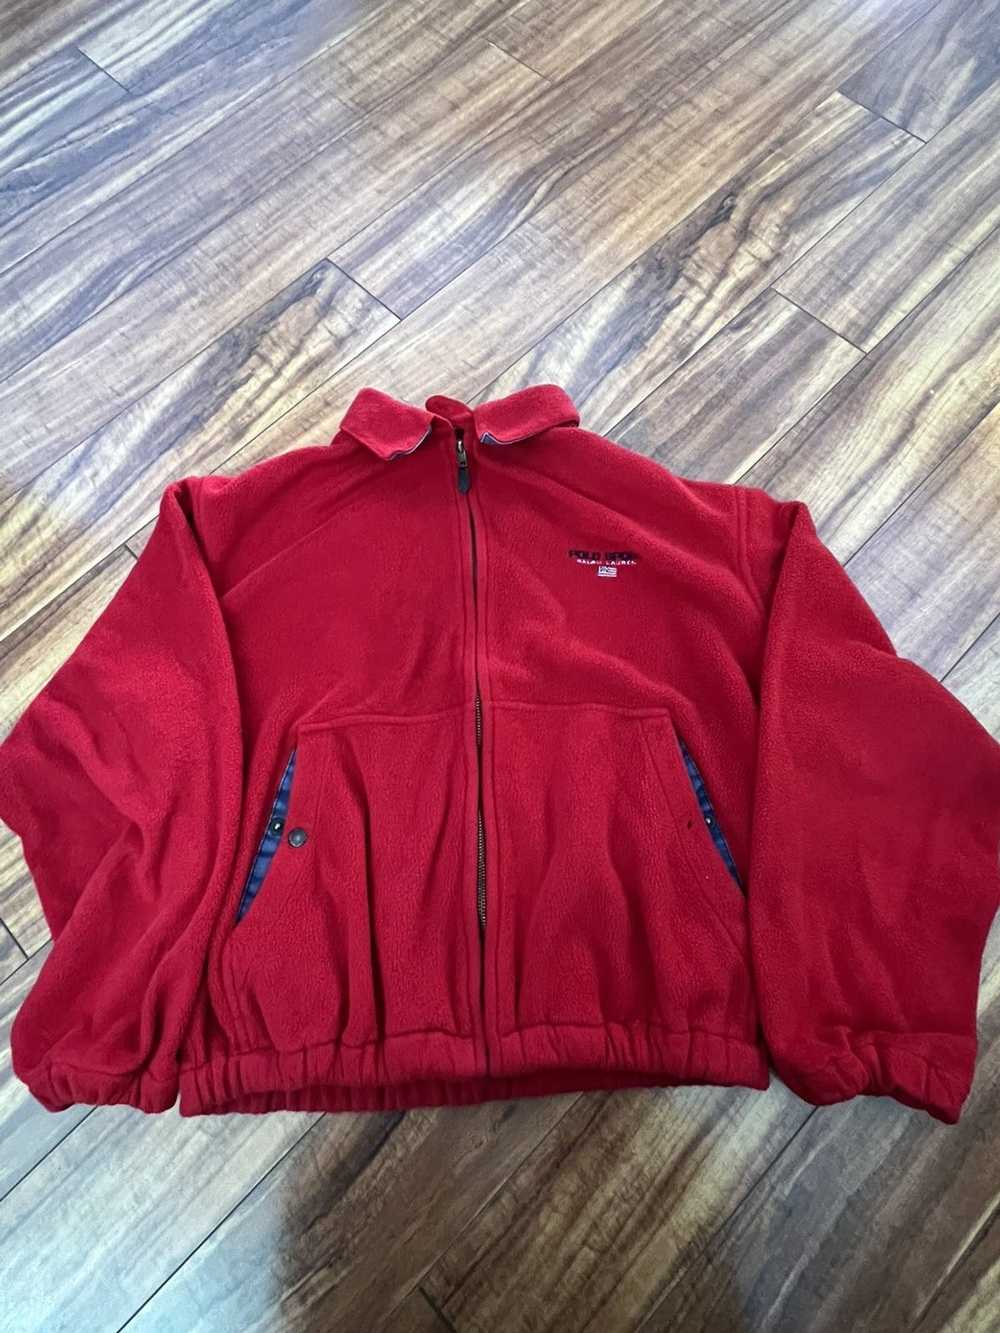 Polo Ralph Lauren Vintage PoloSports red jackets - image 4